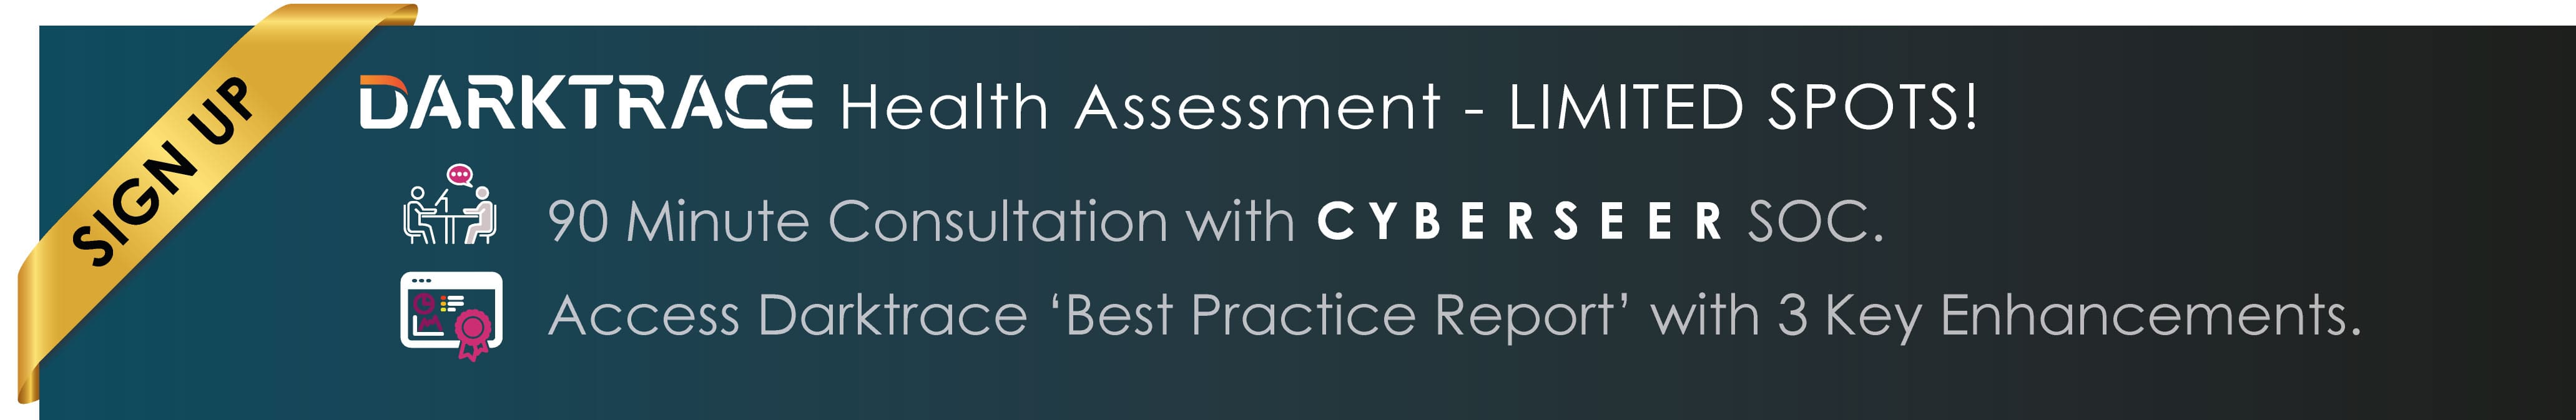 Sign up to Cyberseer's Free Darktrace Health Assessment